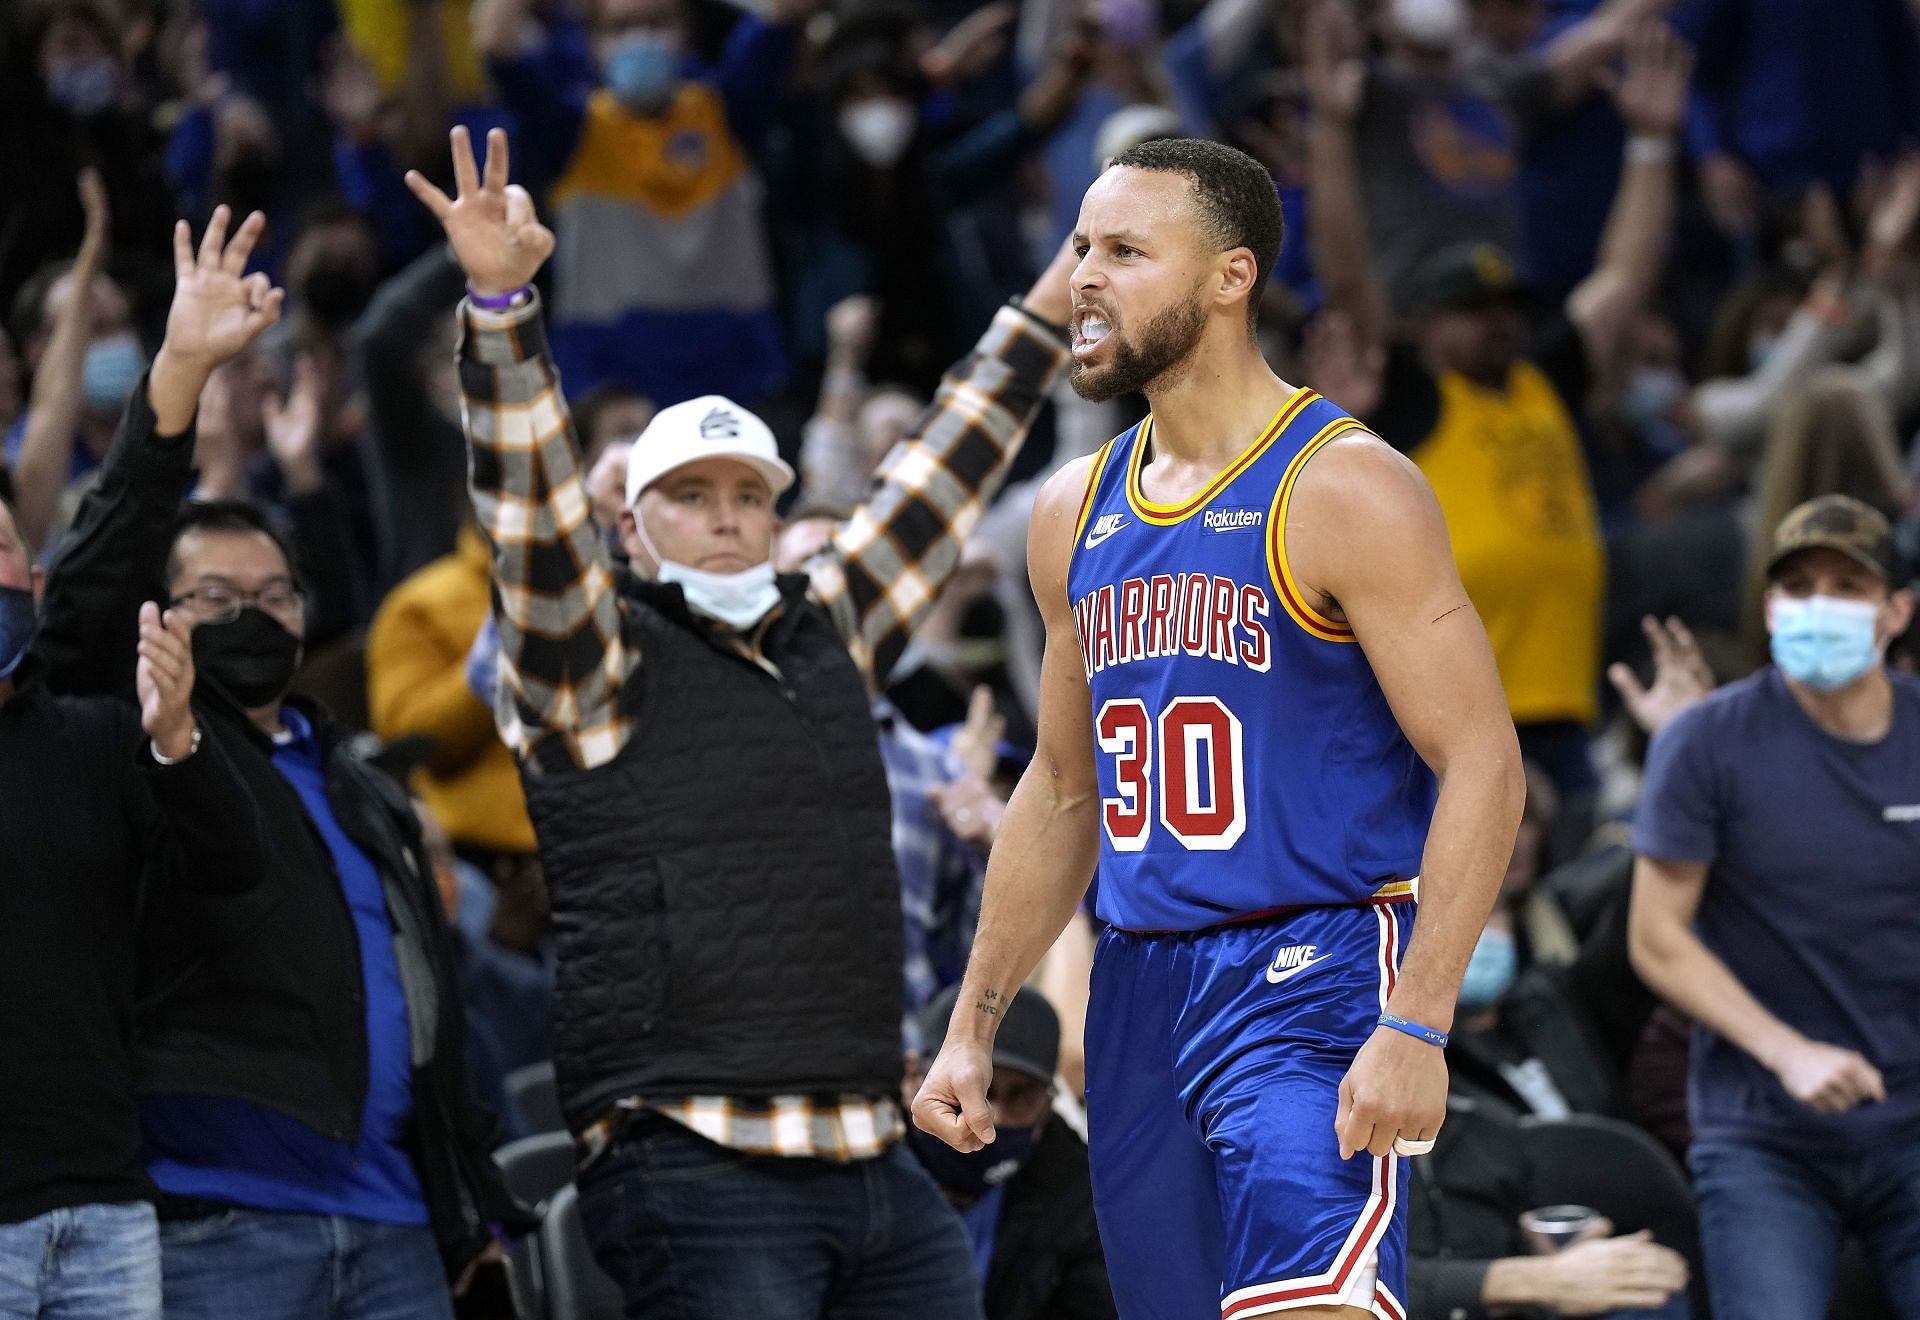 Stephen Curry of the Golden State Warriors reacts after making a 3-point shot against the Memphis Grizzlies during the fourth quarter on Dec. 23 in San Francisco, California.